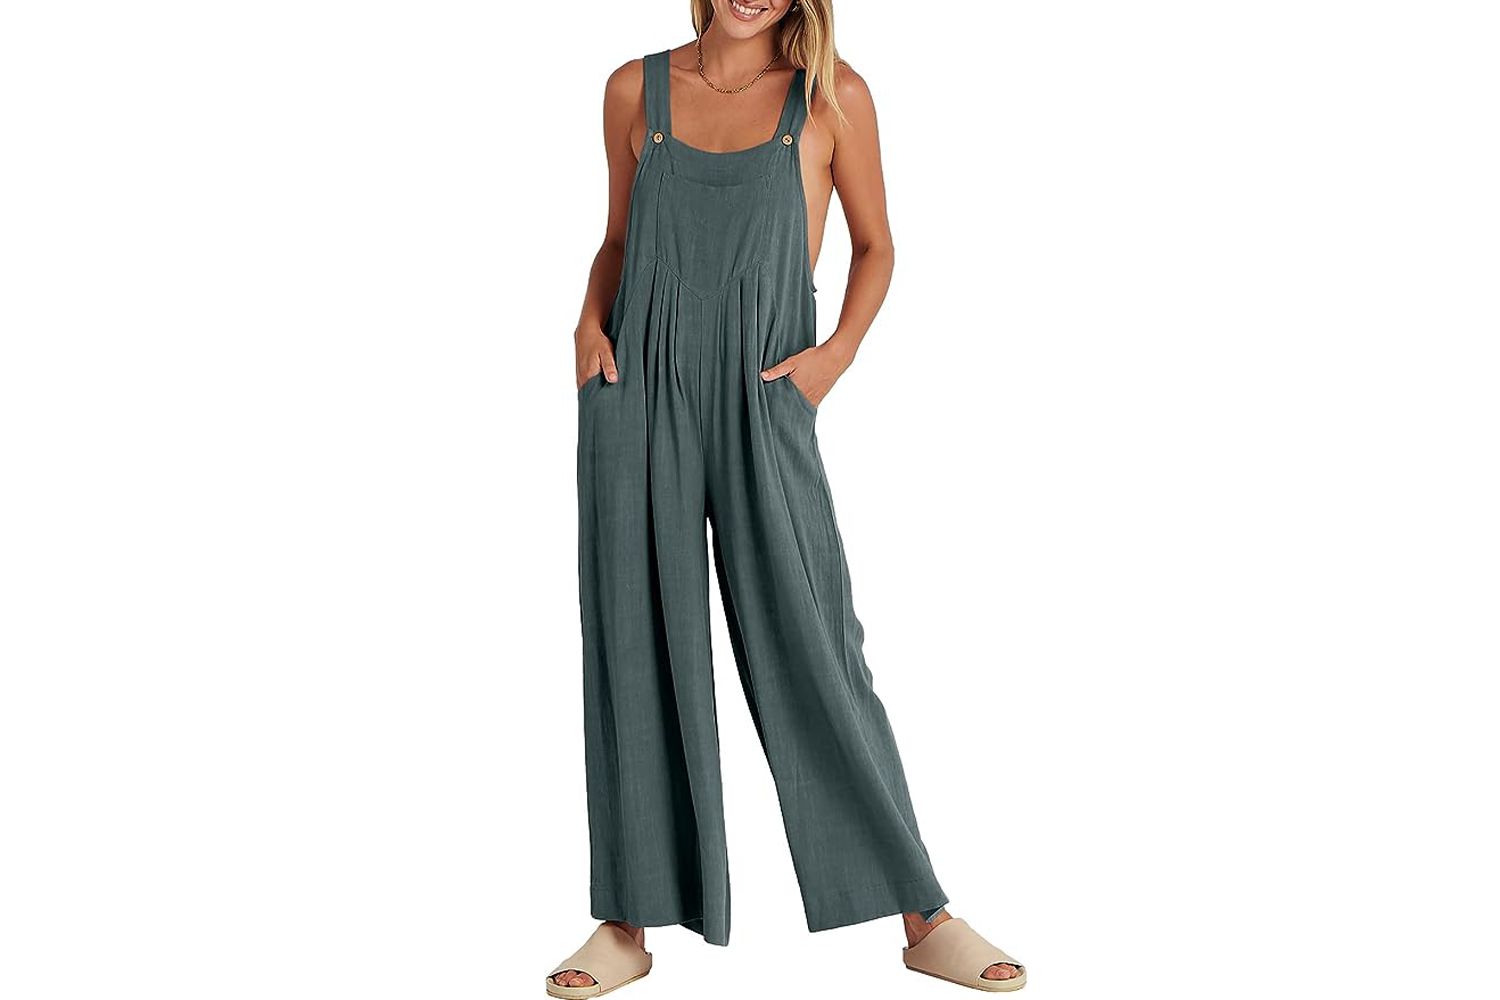 October Amazon Prime Day ANRABESS Women's Overalls Jumpsuit Casual Loose Sleeveless 